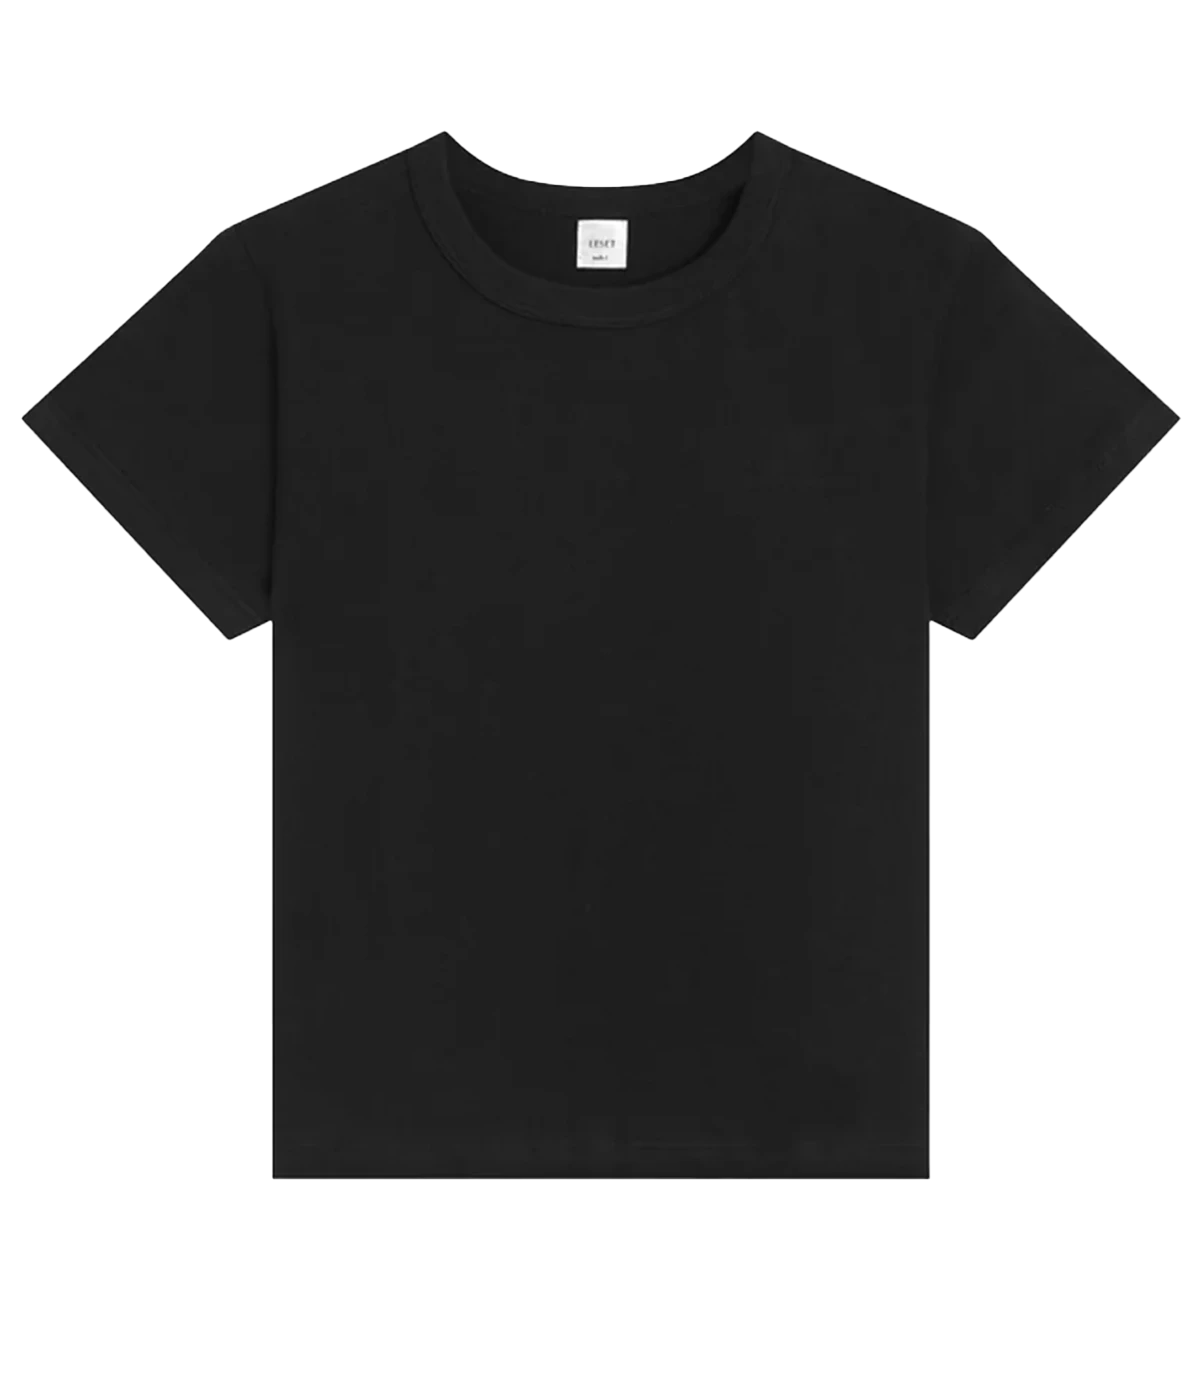 A timeless classic black cotton t-shirt, short sleeve and round neckline 100% cotton. Comfortable, everyday t-shirt, chic and effortless, modern woman, made internationally, bra friendly. 